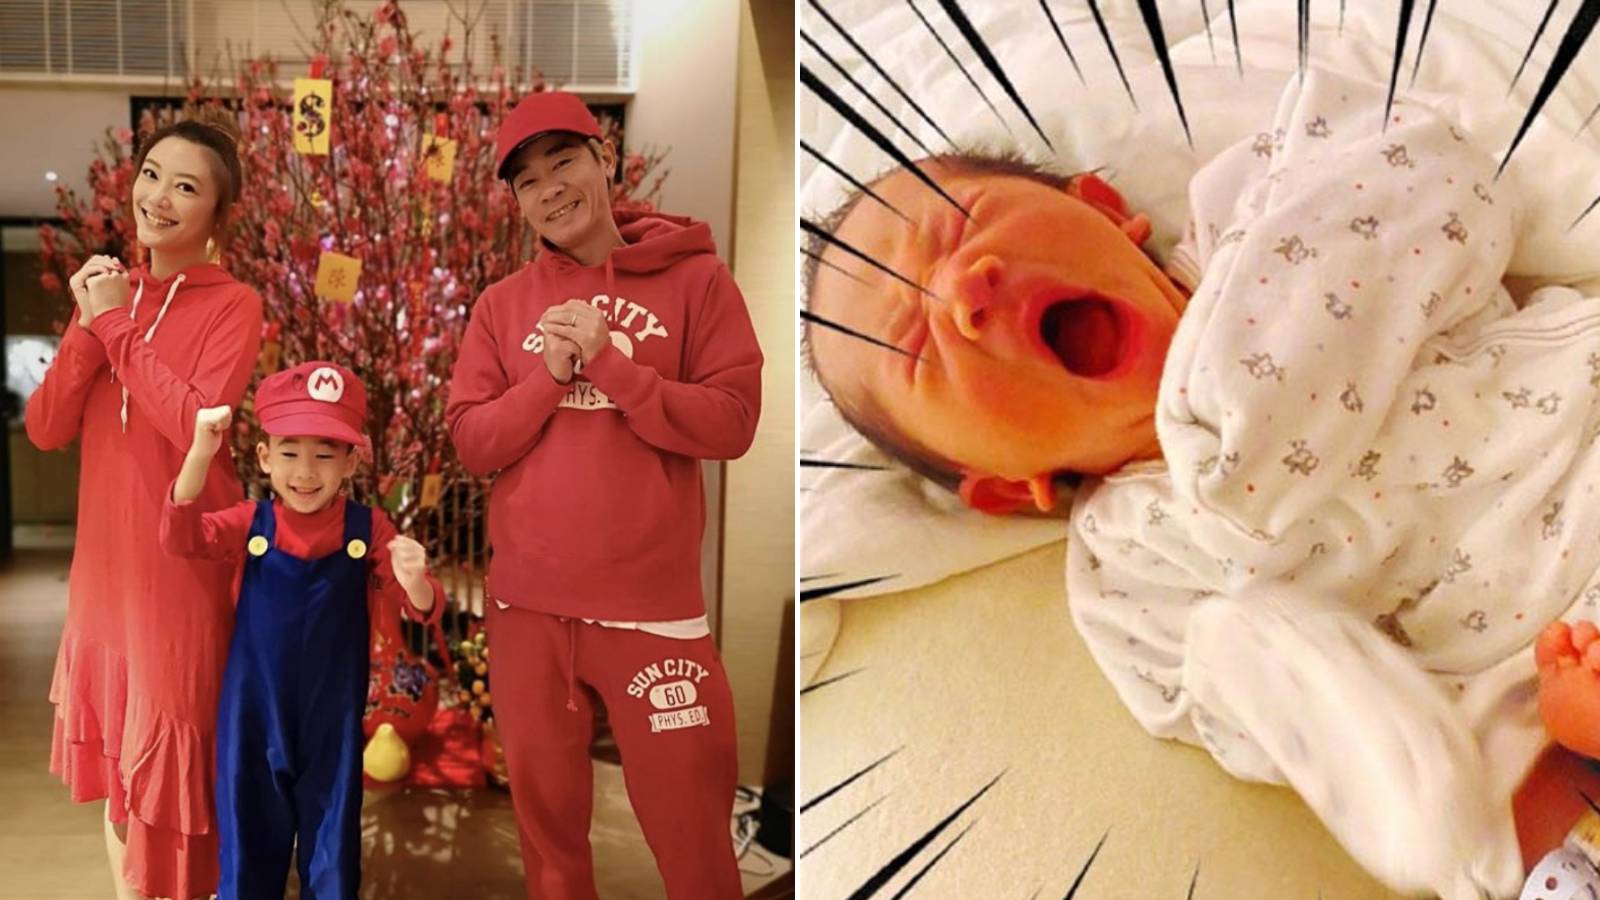 Jordan Chan Did Not Want To Cut His Newborn Son’s Umbilical Cord For This Very Practical Reason